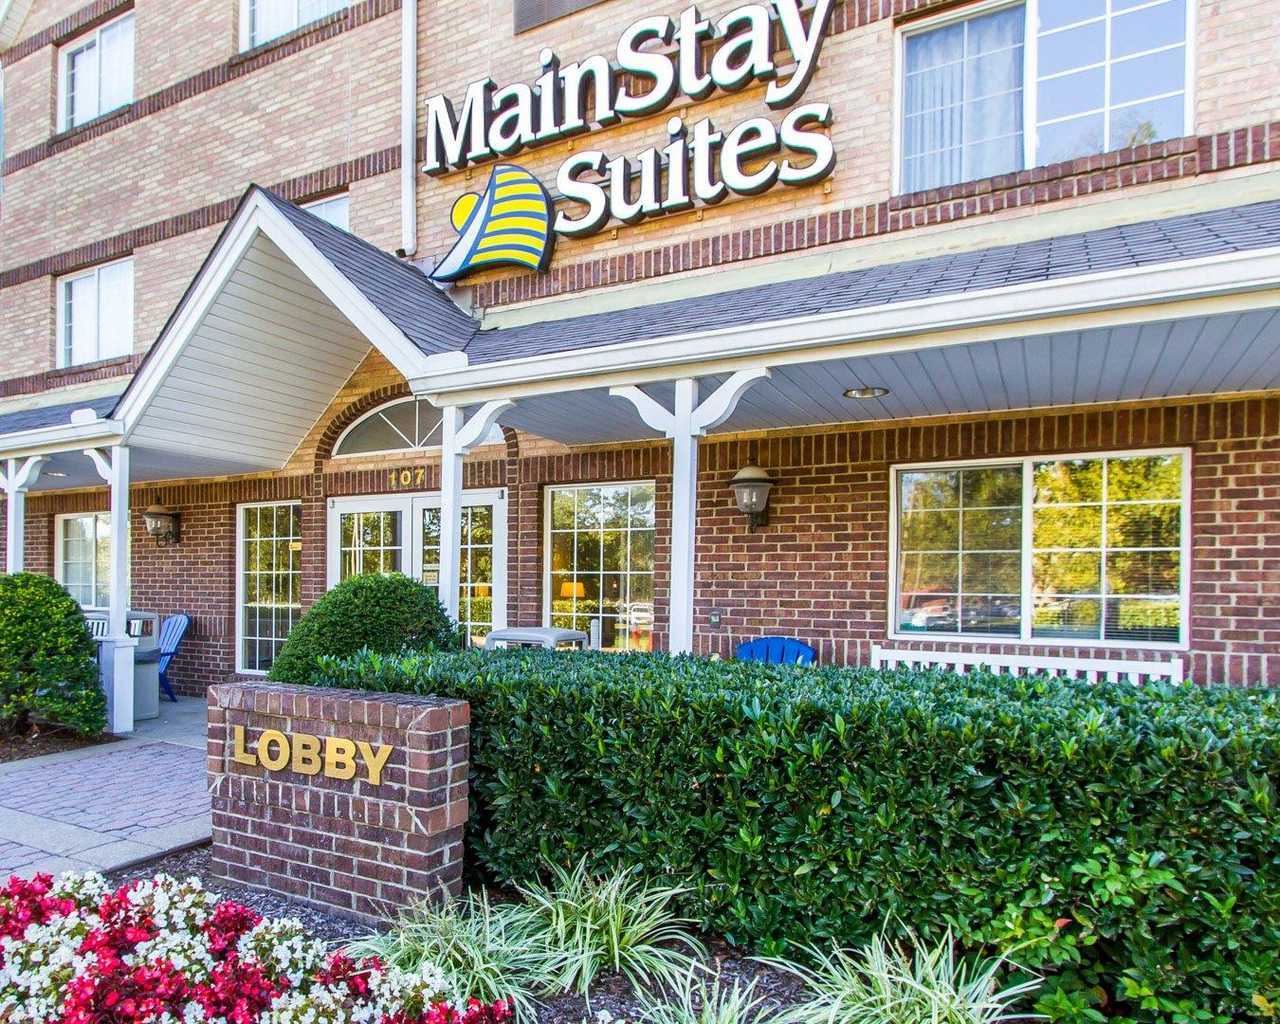 Photo of MainStay Suites Brentwood-Nashville, Brentwood, TN